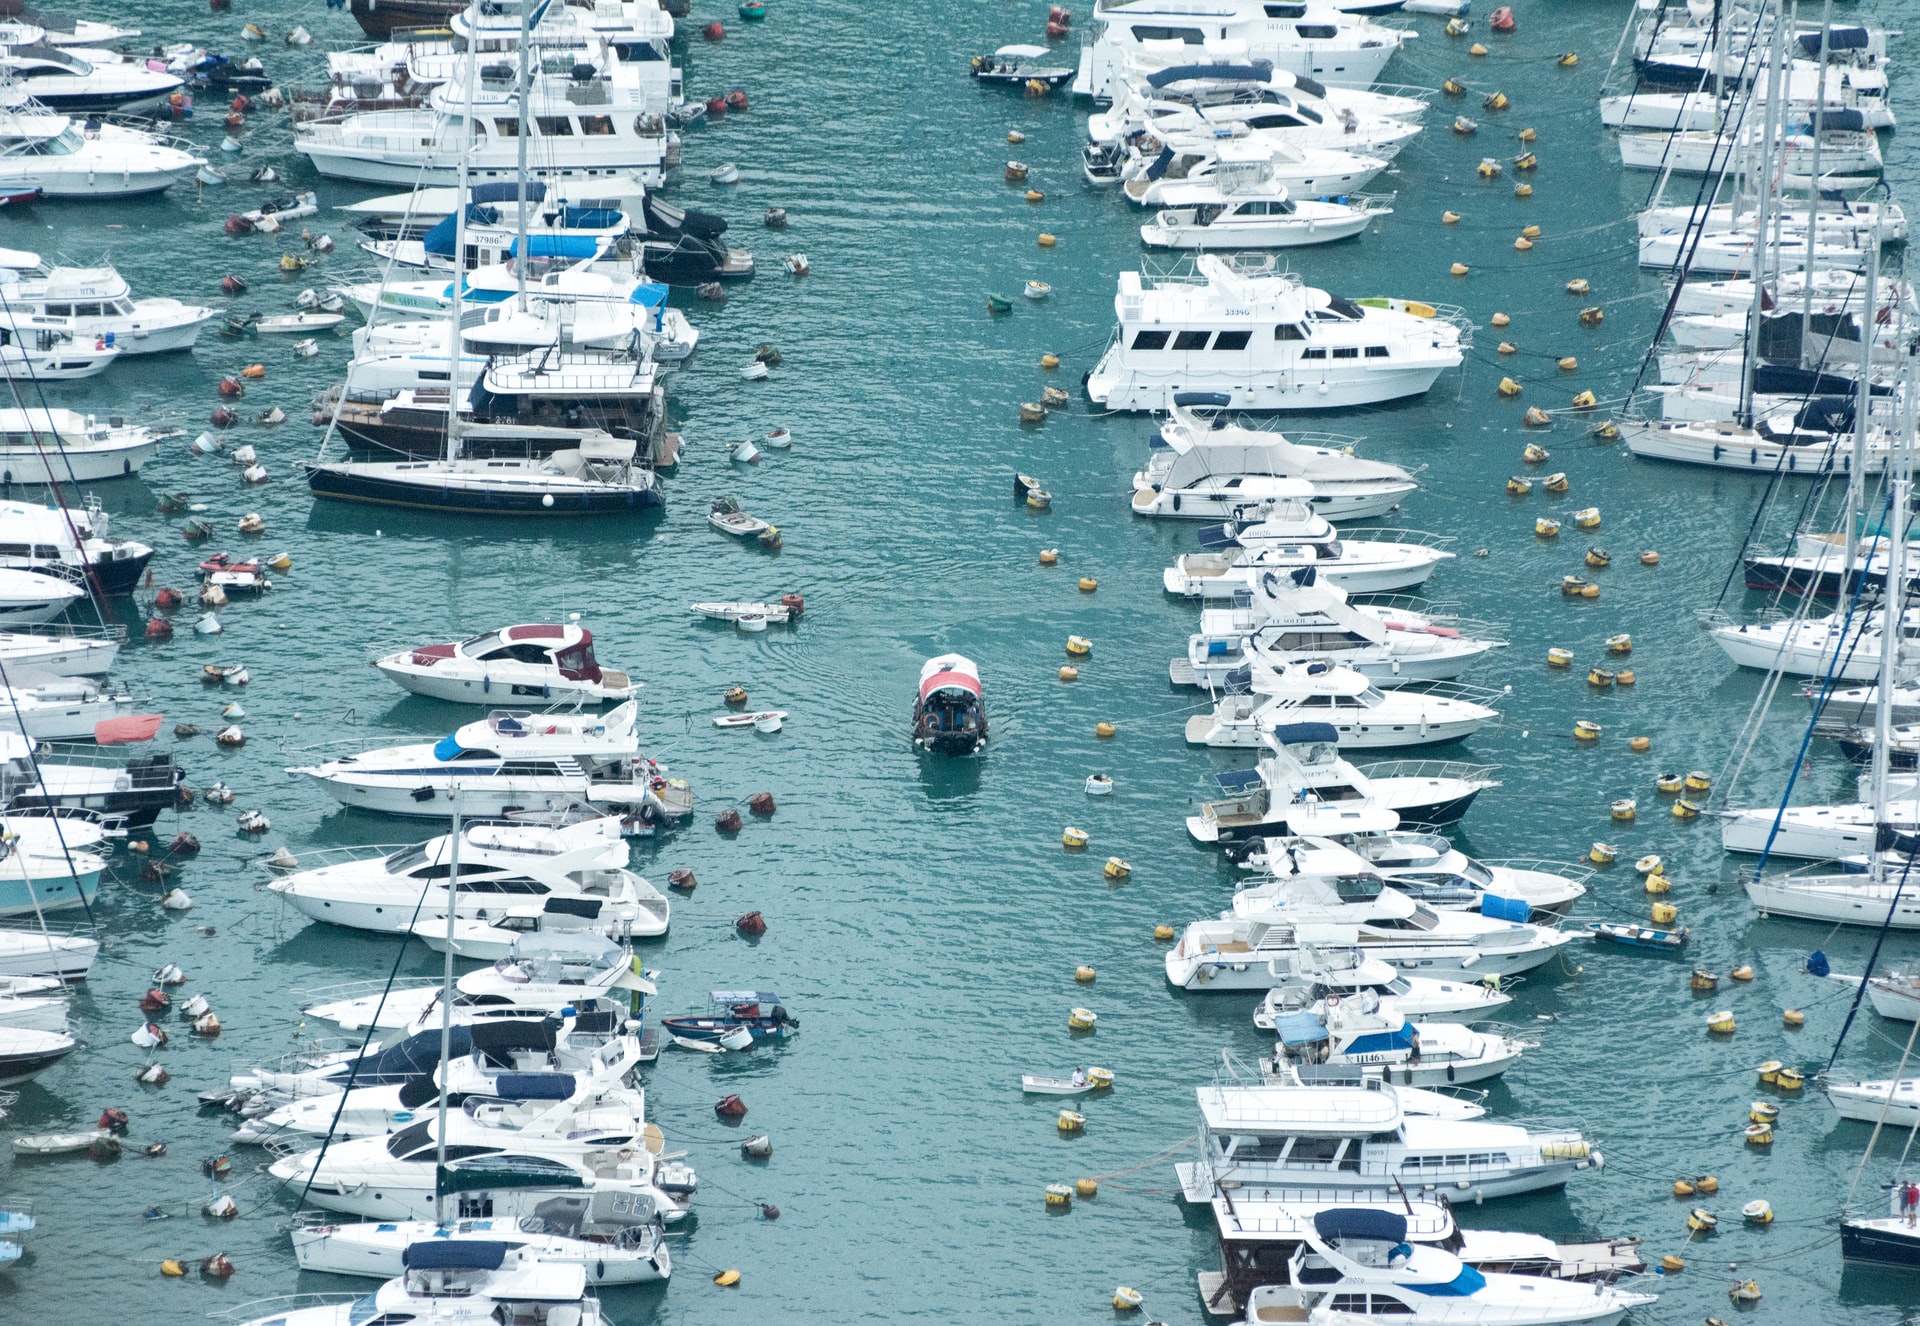 What Makes a Great Two-Way Radio System for Yachts?